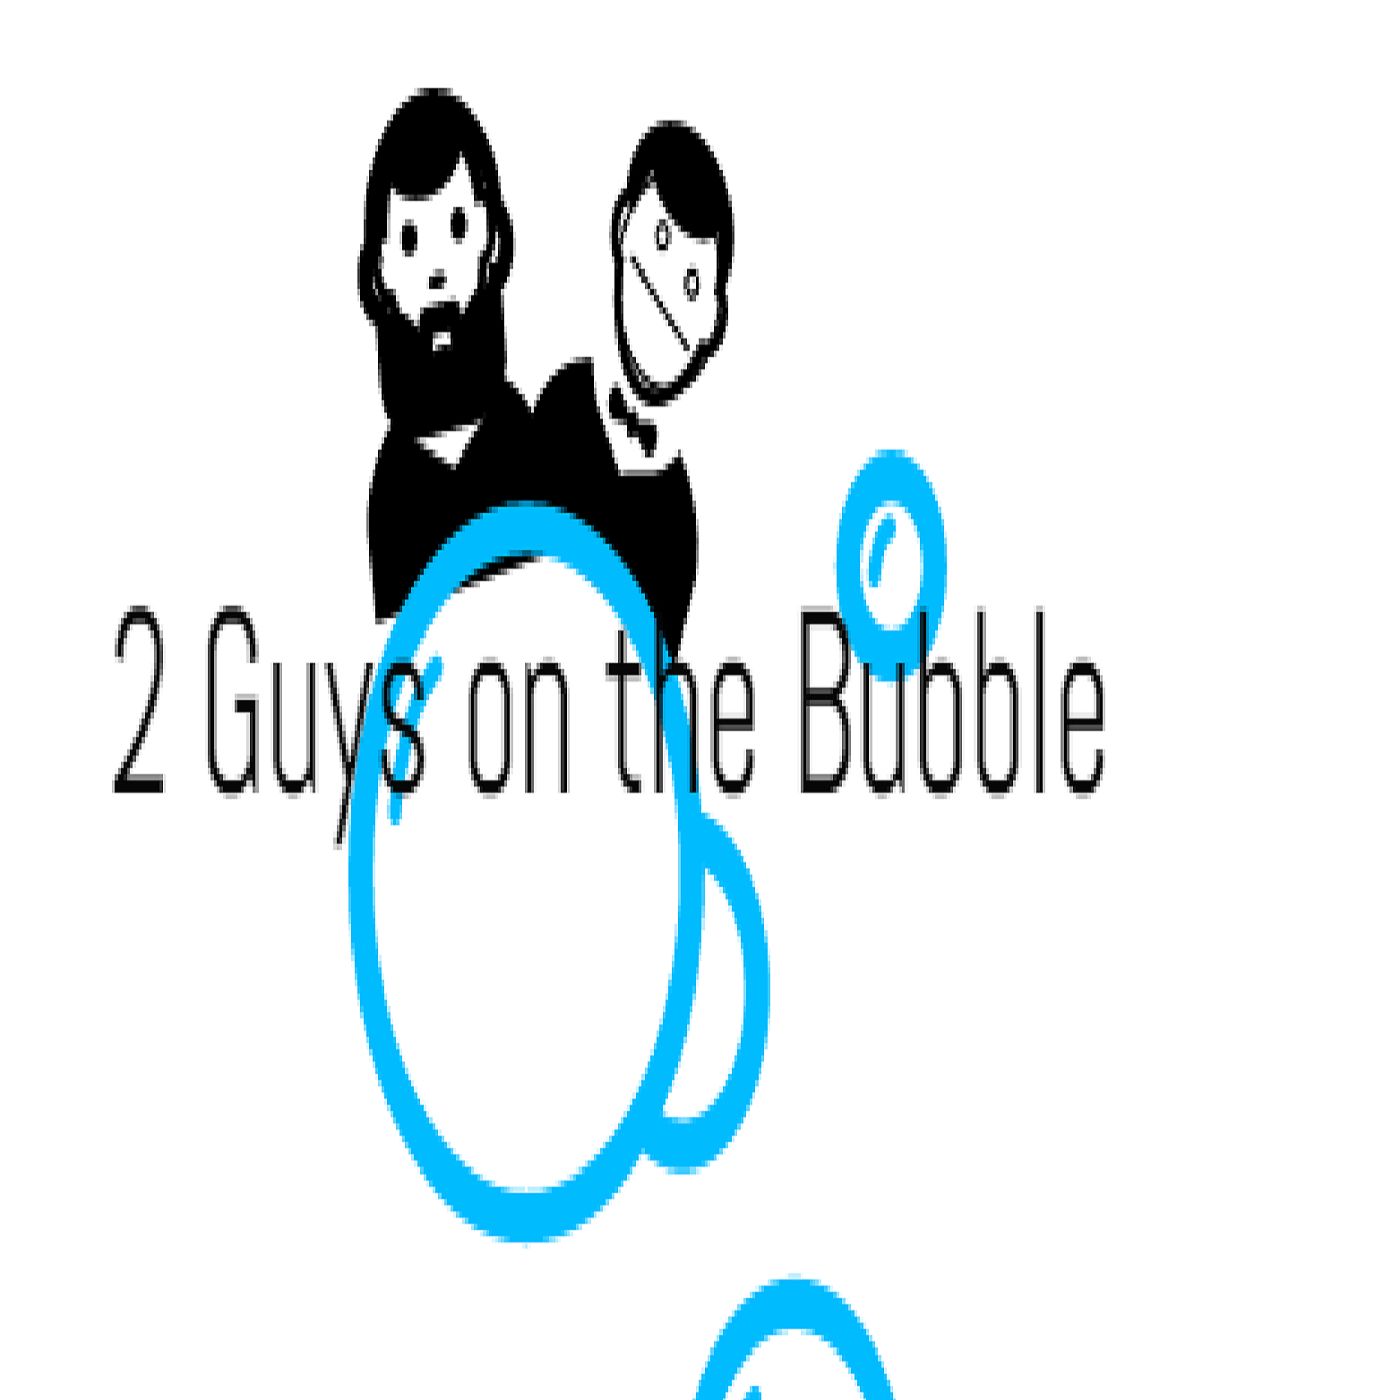 2 Guys on the bubble